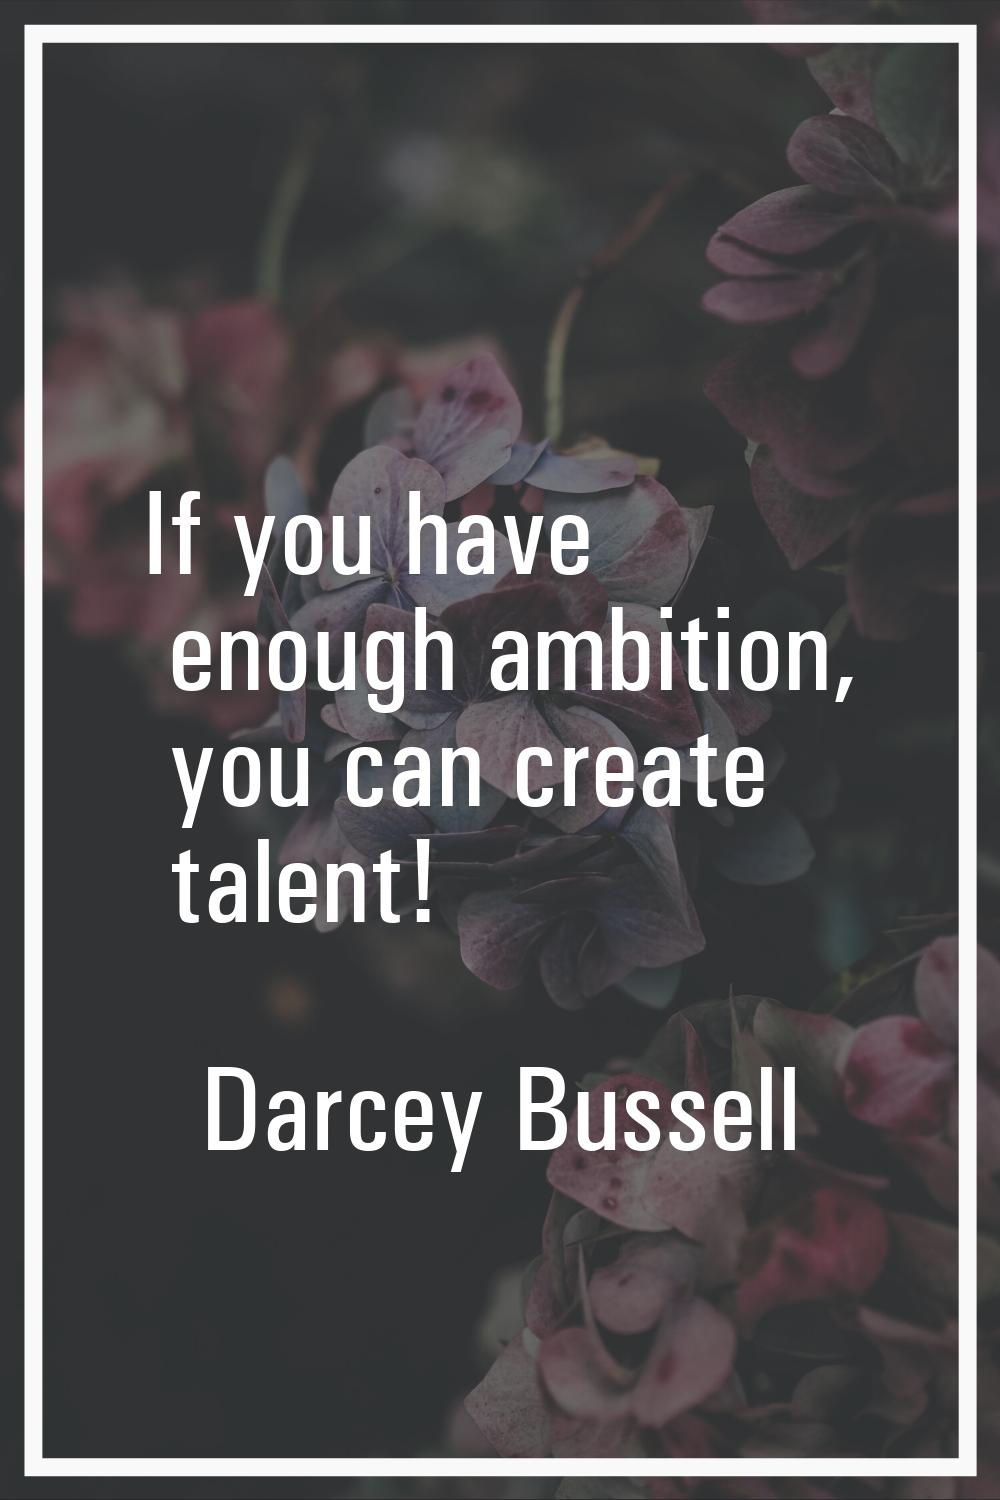 If you have enough ambition, you can create talent!